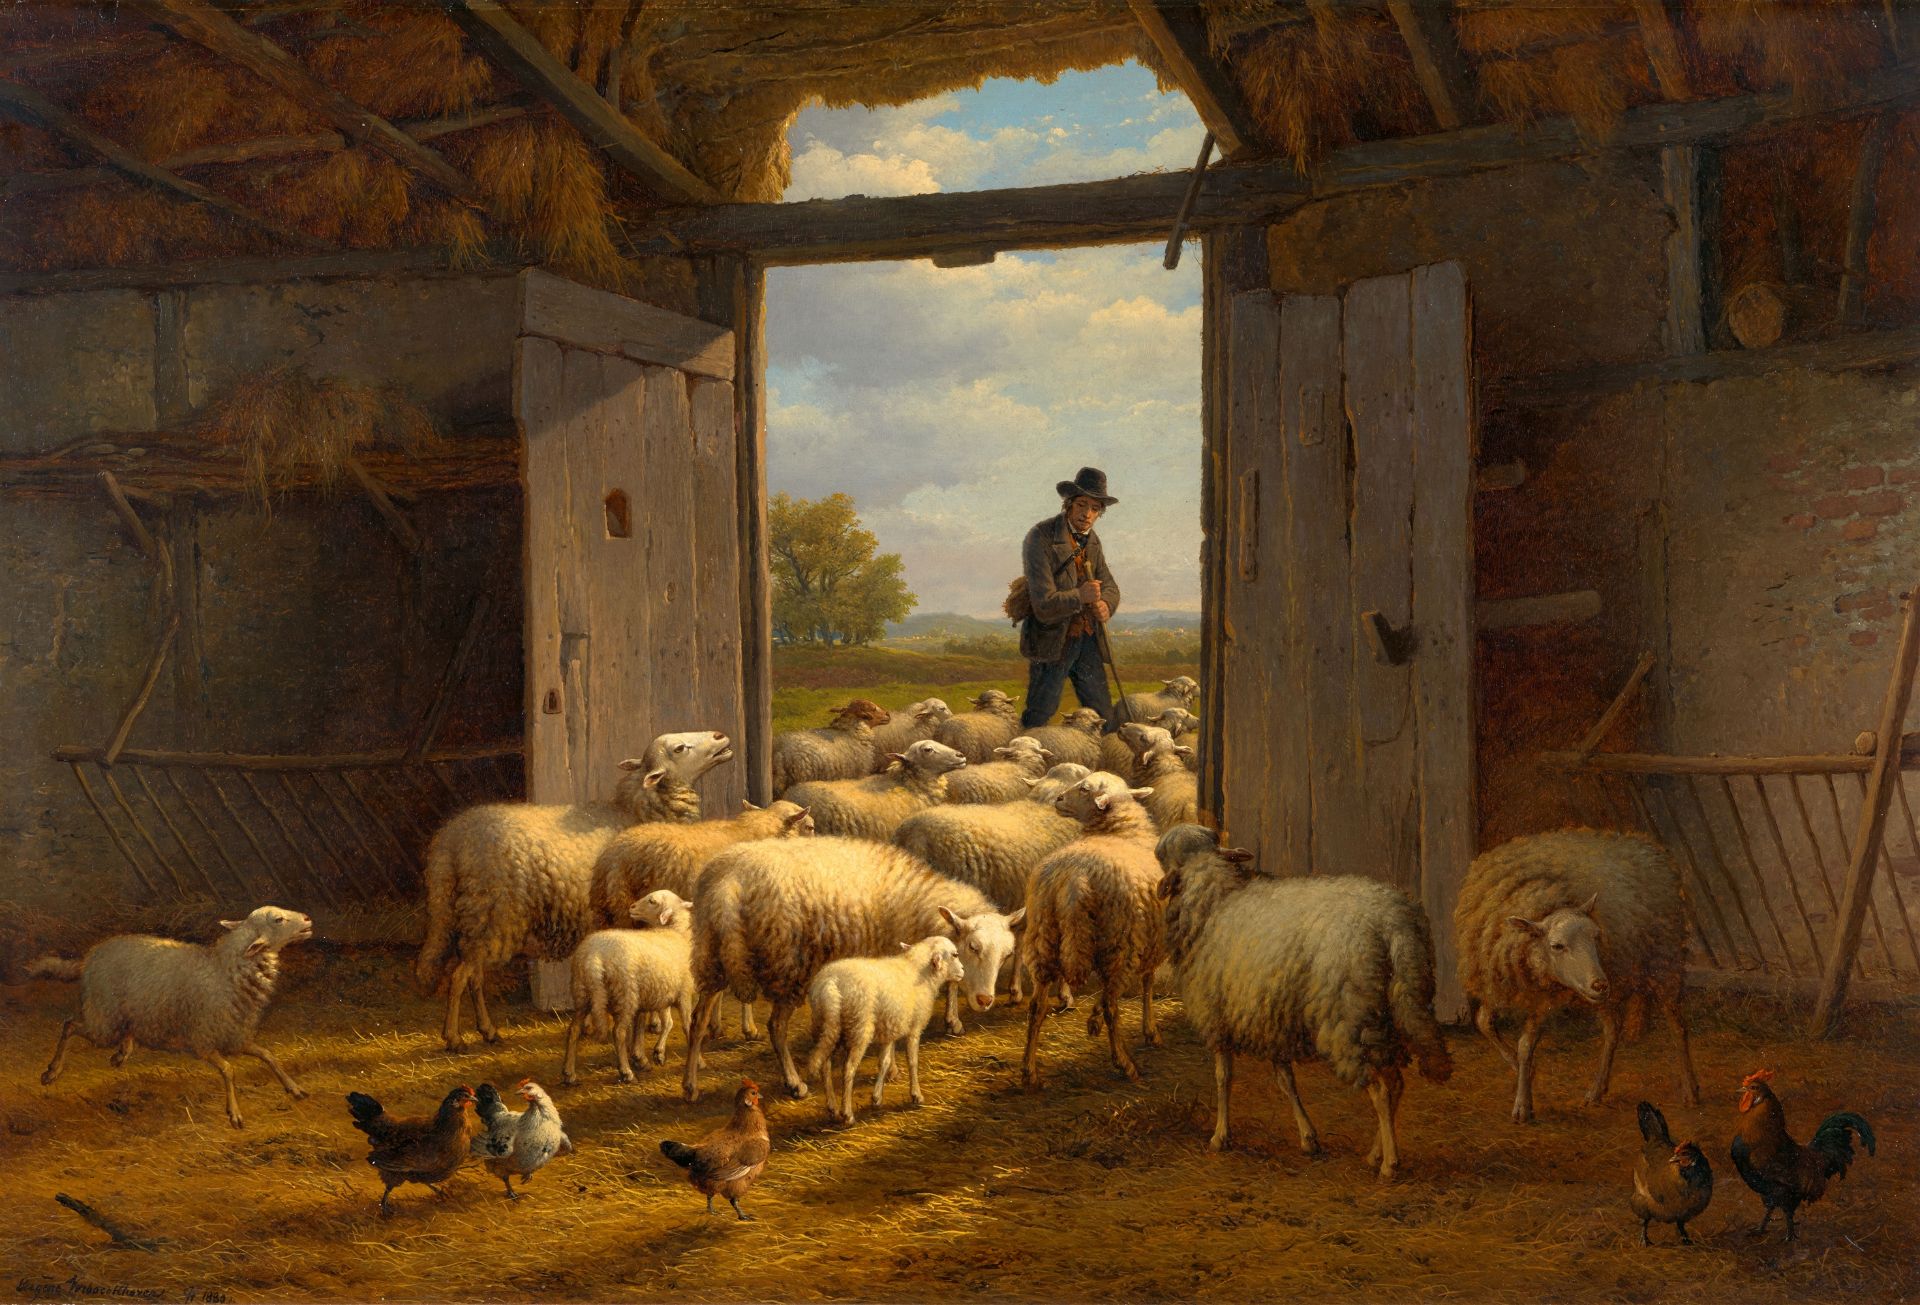 Eugène-Joseph Verboeckhoven, Flock of Sheep in a Stable